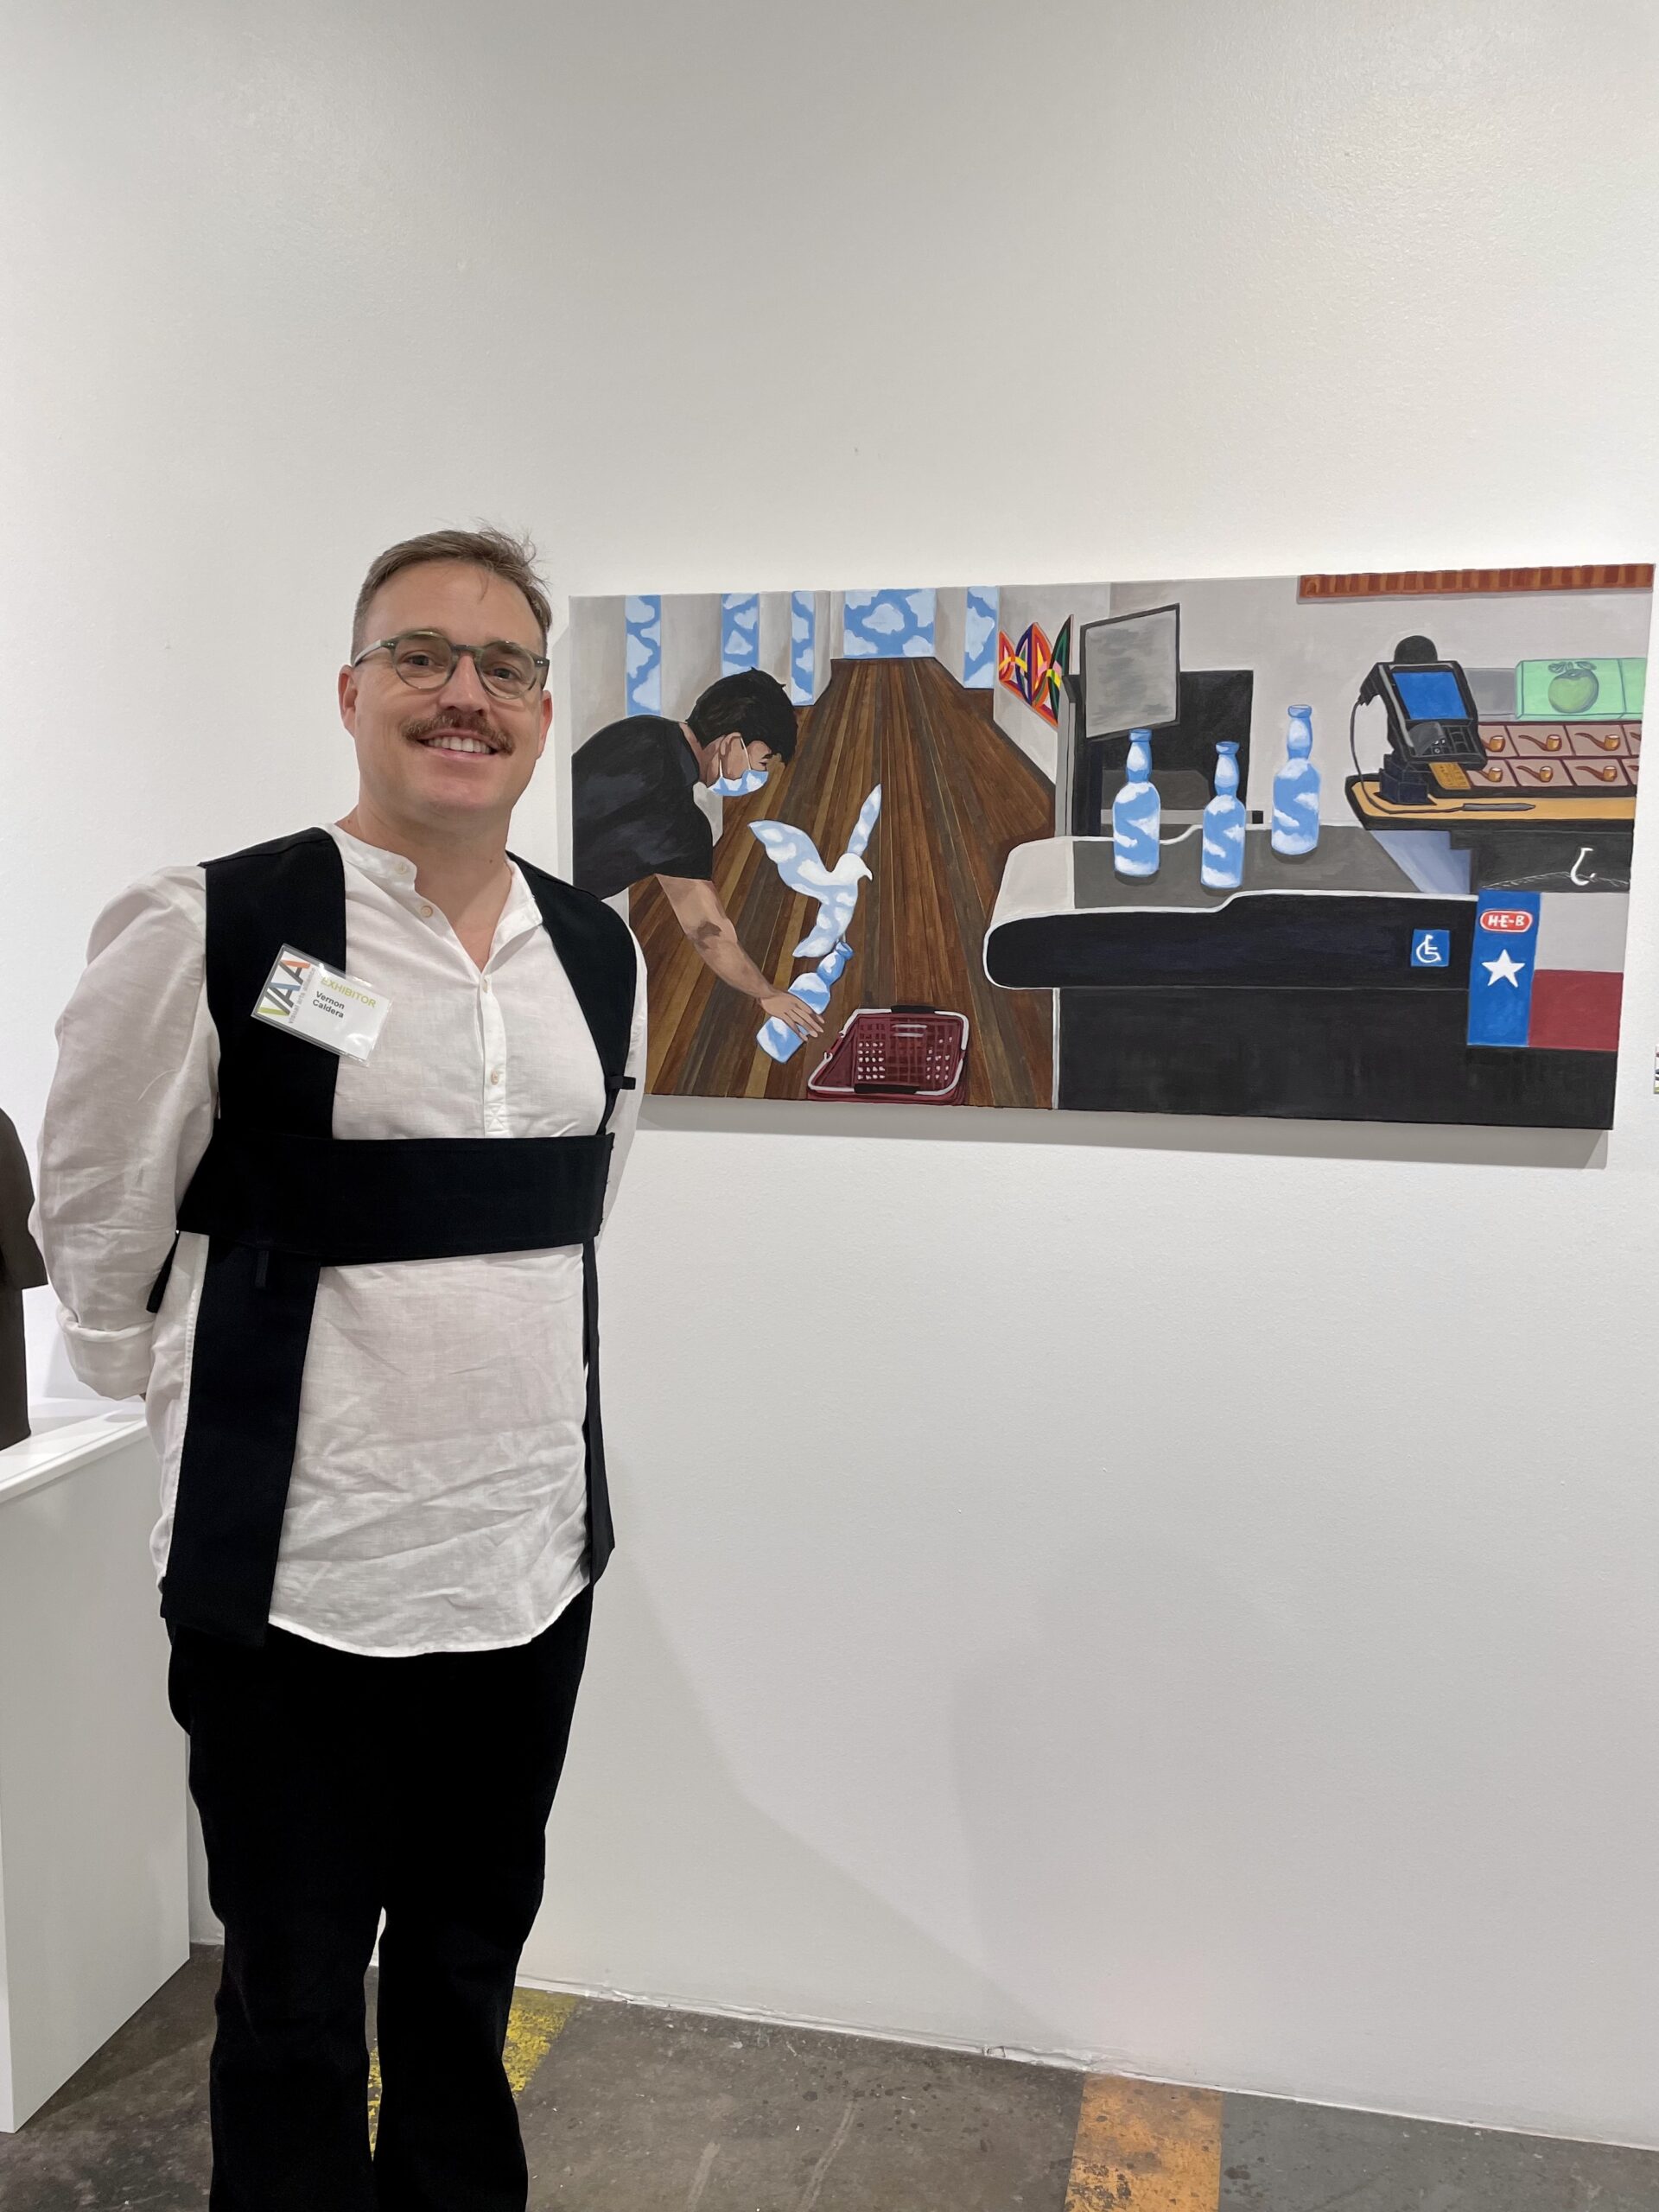 "Shopping at the Menil" at Spring Street Studios for Visual Art Alliance's 38th Annual Juried Exhibition Juried by Allison de Lima Green MFAH